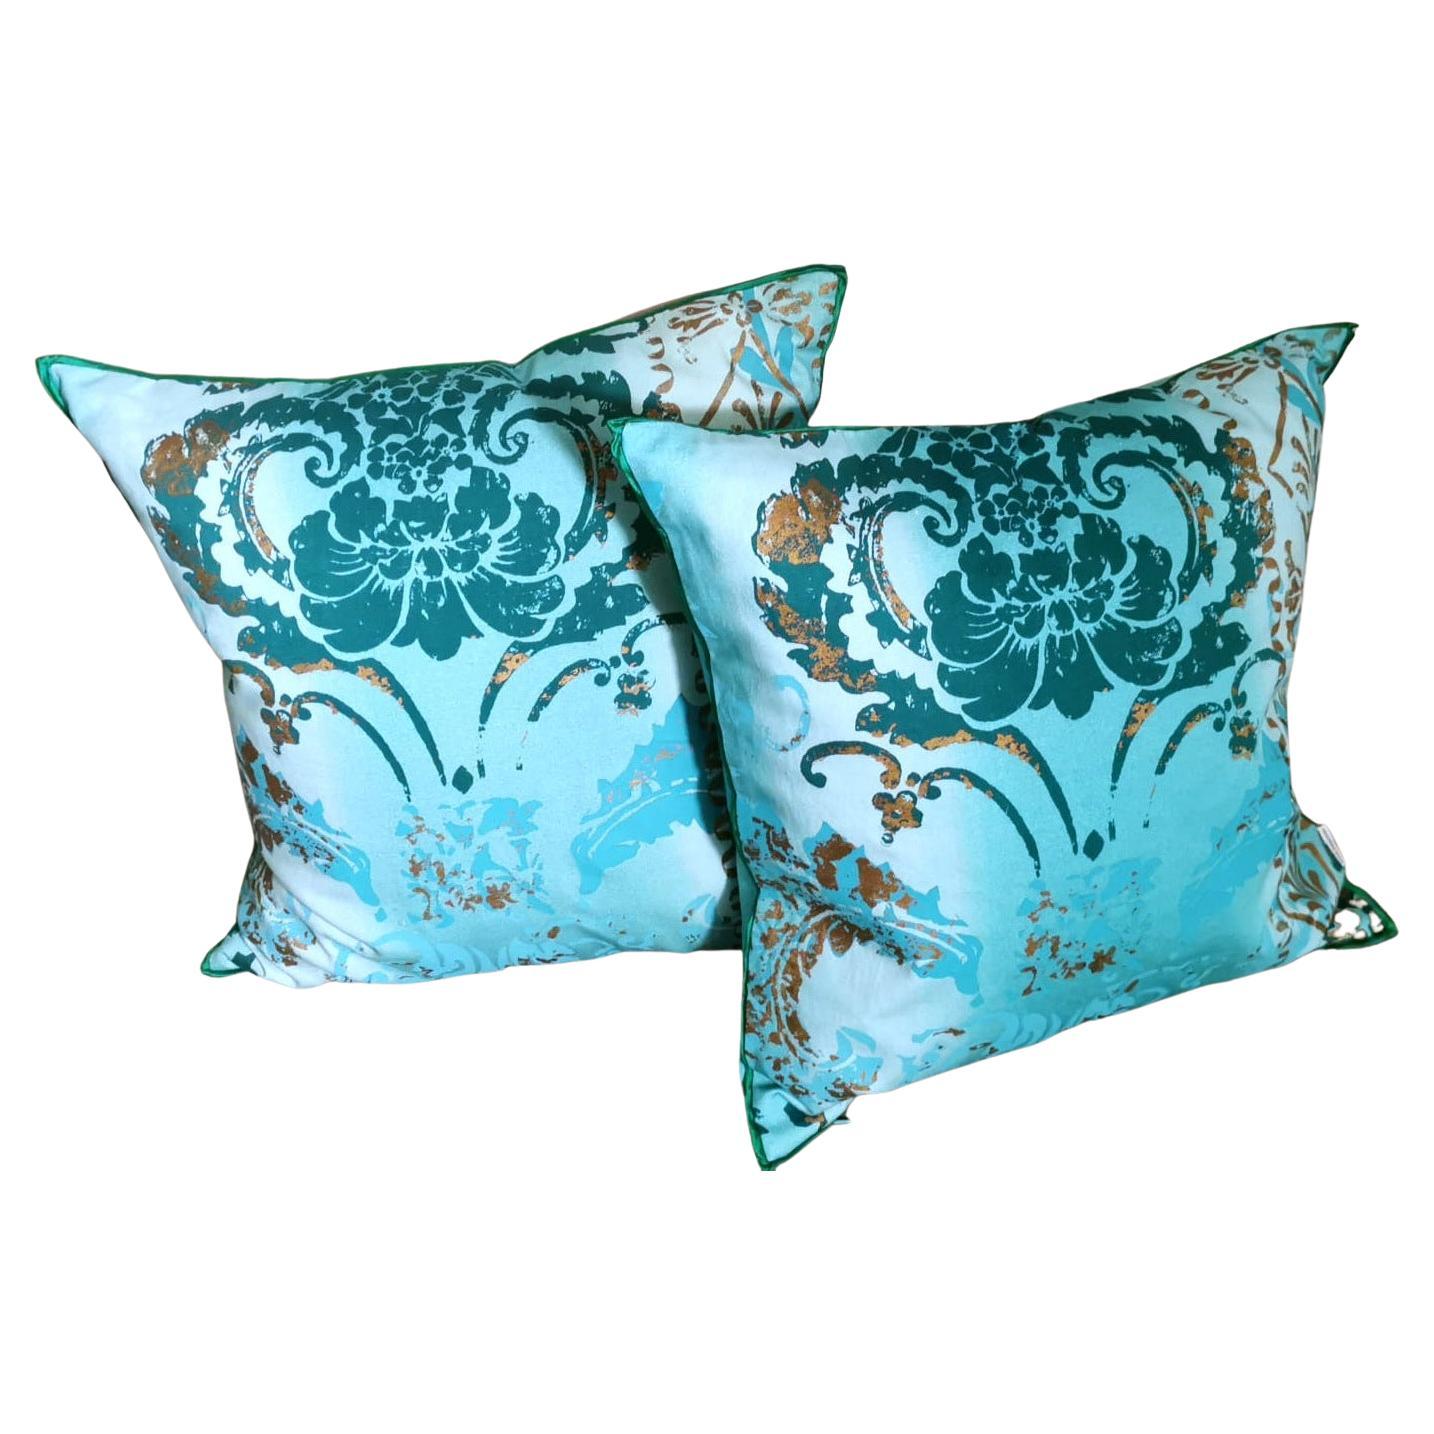 Guild Designer Pair of Printed Cotton Pillows with Feather Interior